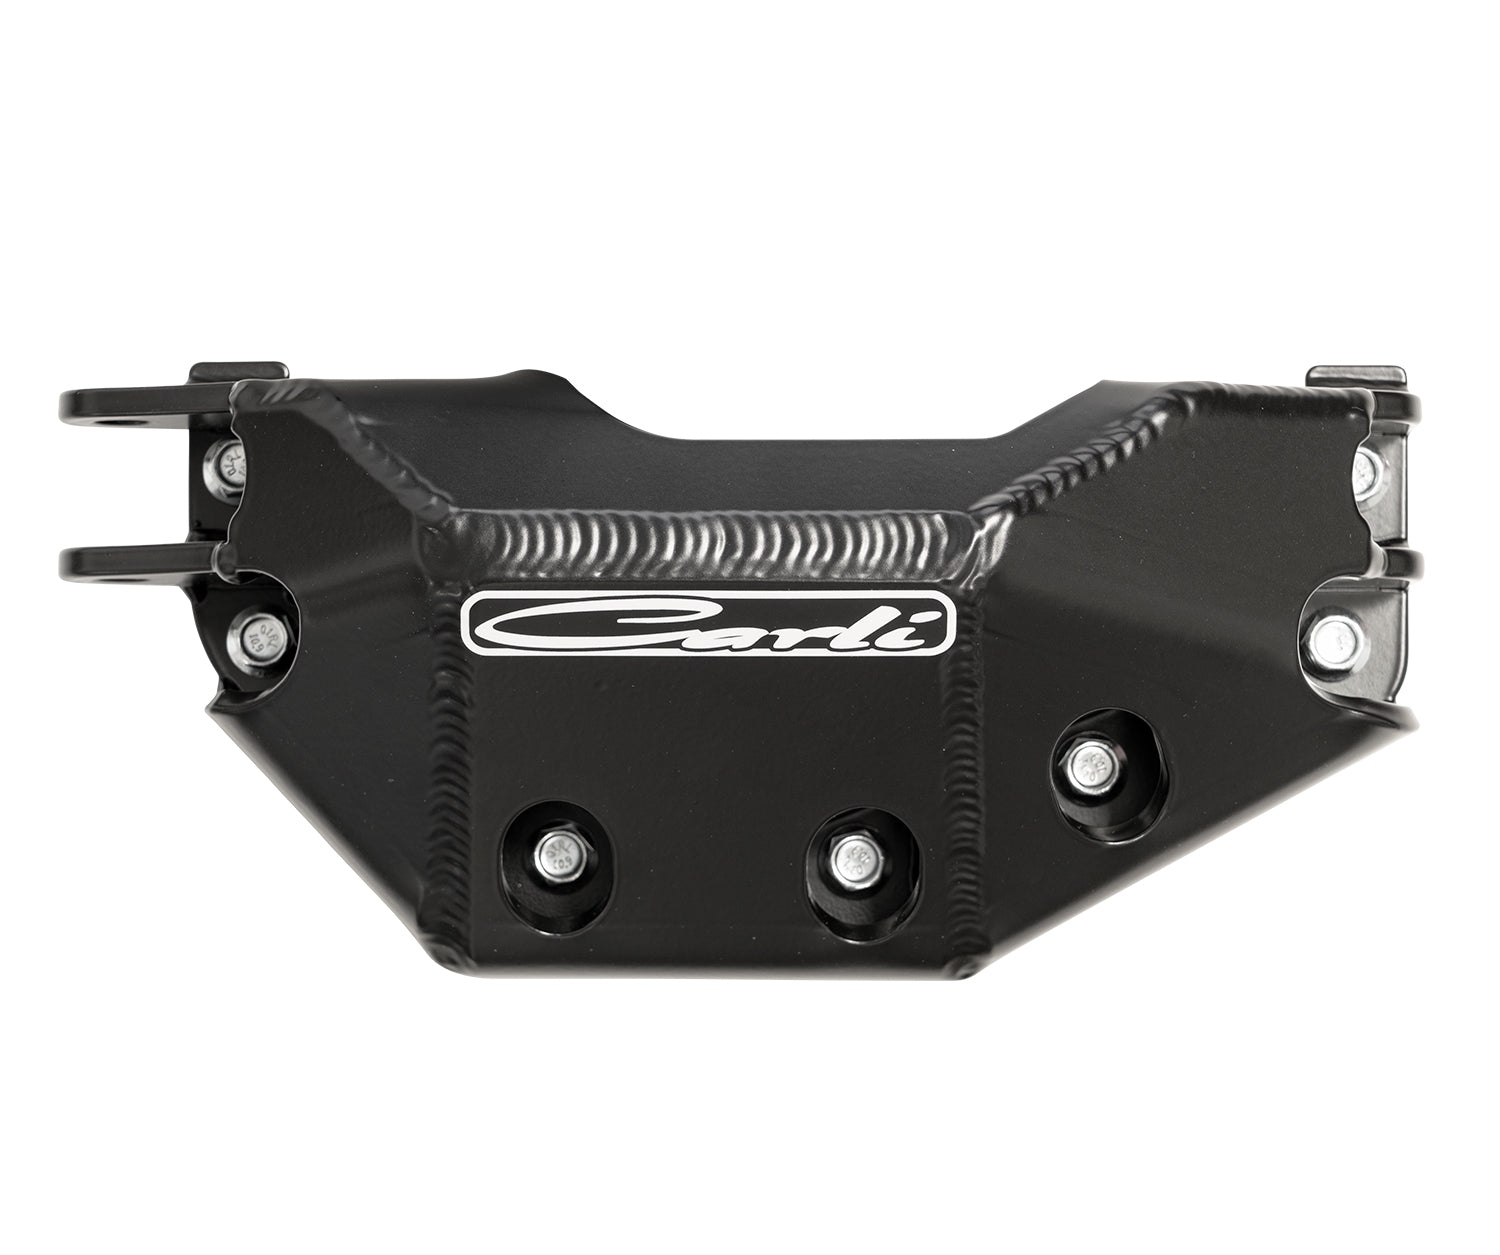 23 Super Duty Front Differential Guard